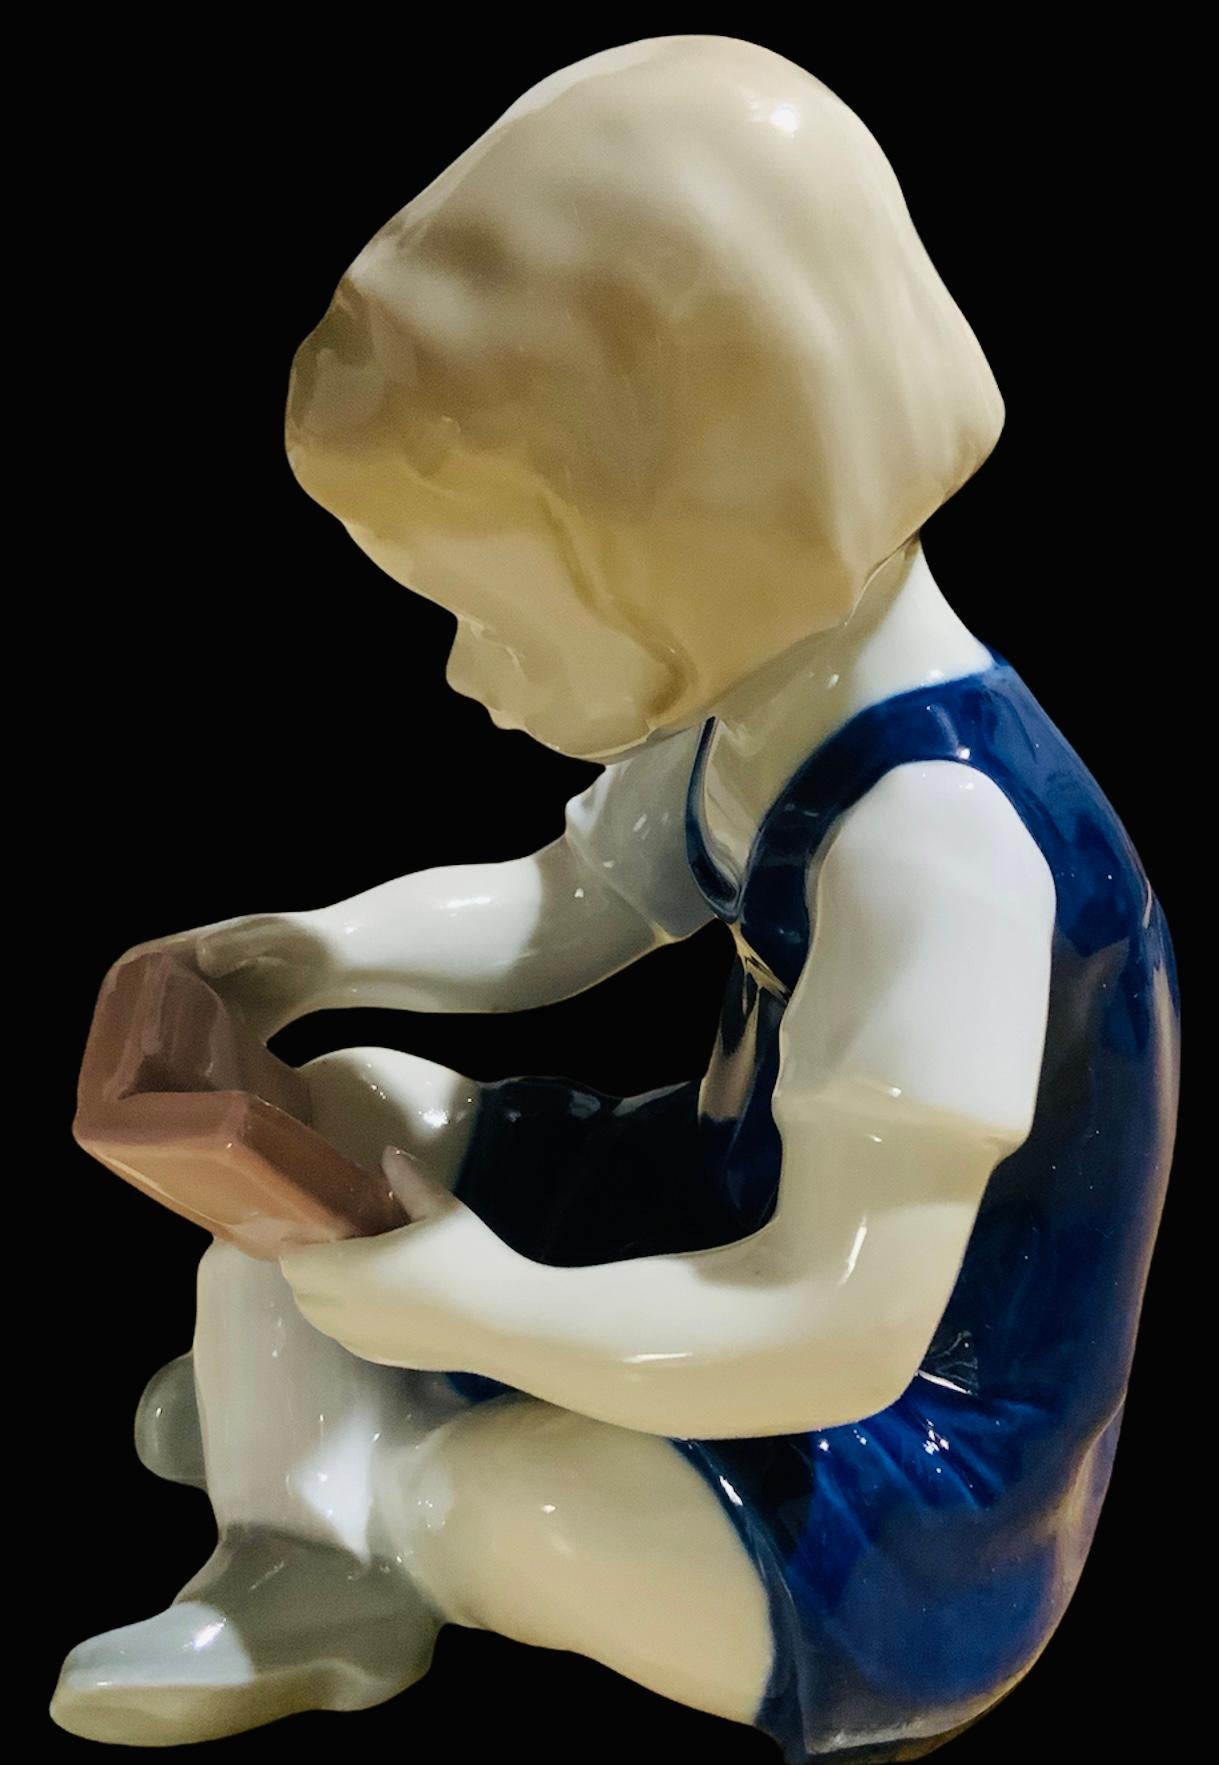 This is a Carl Scheidig German porcelain figurine of a girl reading a book. It depicts a girl dressed with a blue jumper, white shirt and grey shoes seated with her legs crossed, holding a book that she is reading. Below the base, it is found the